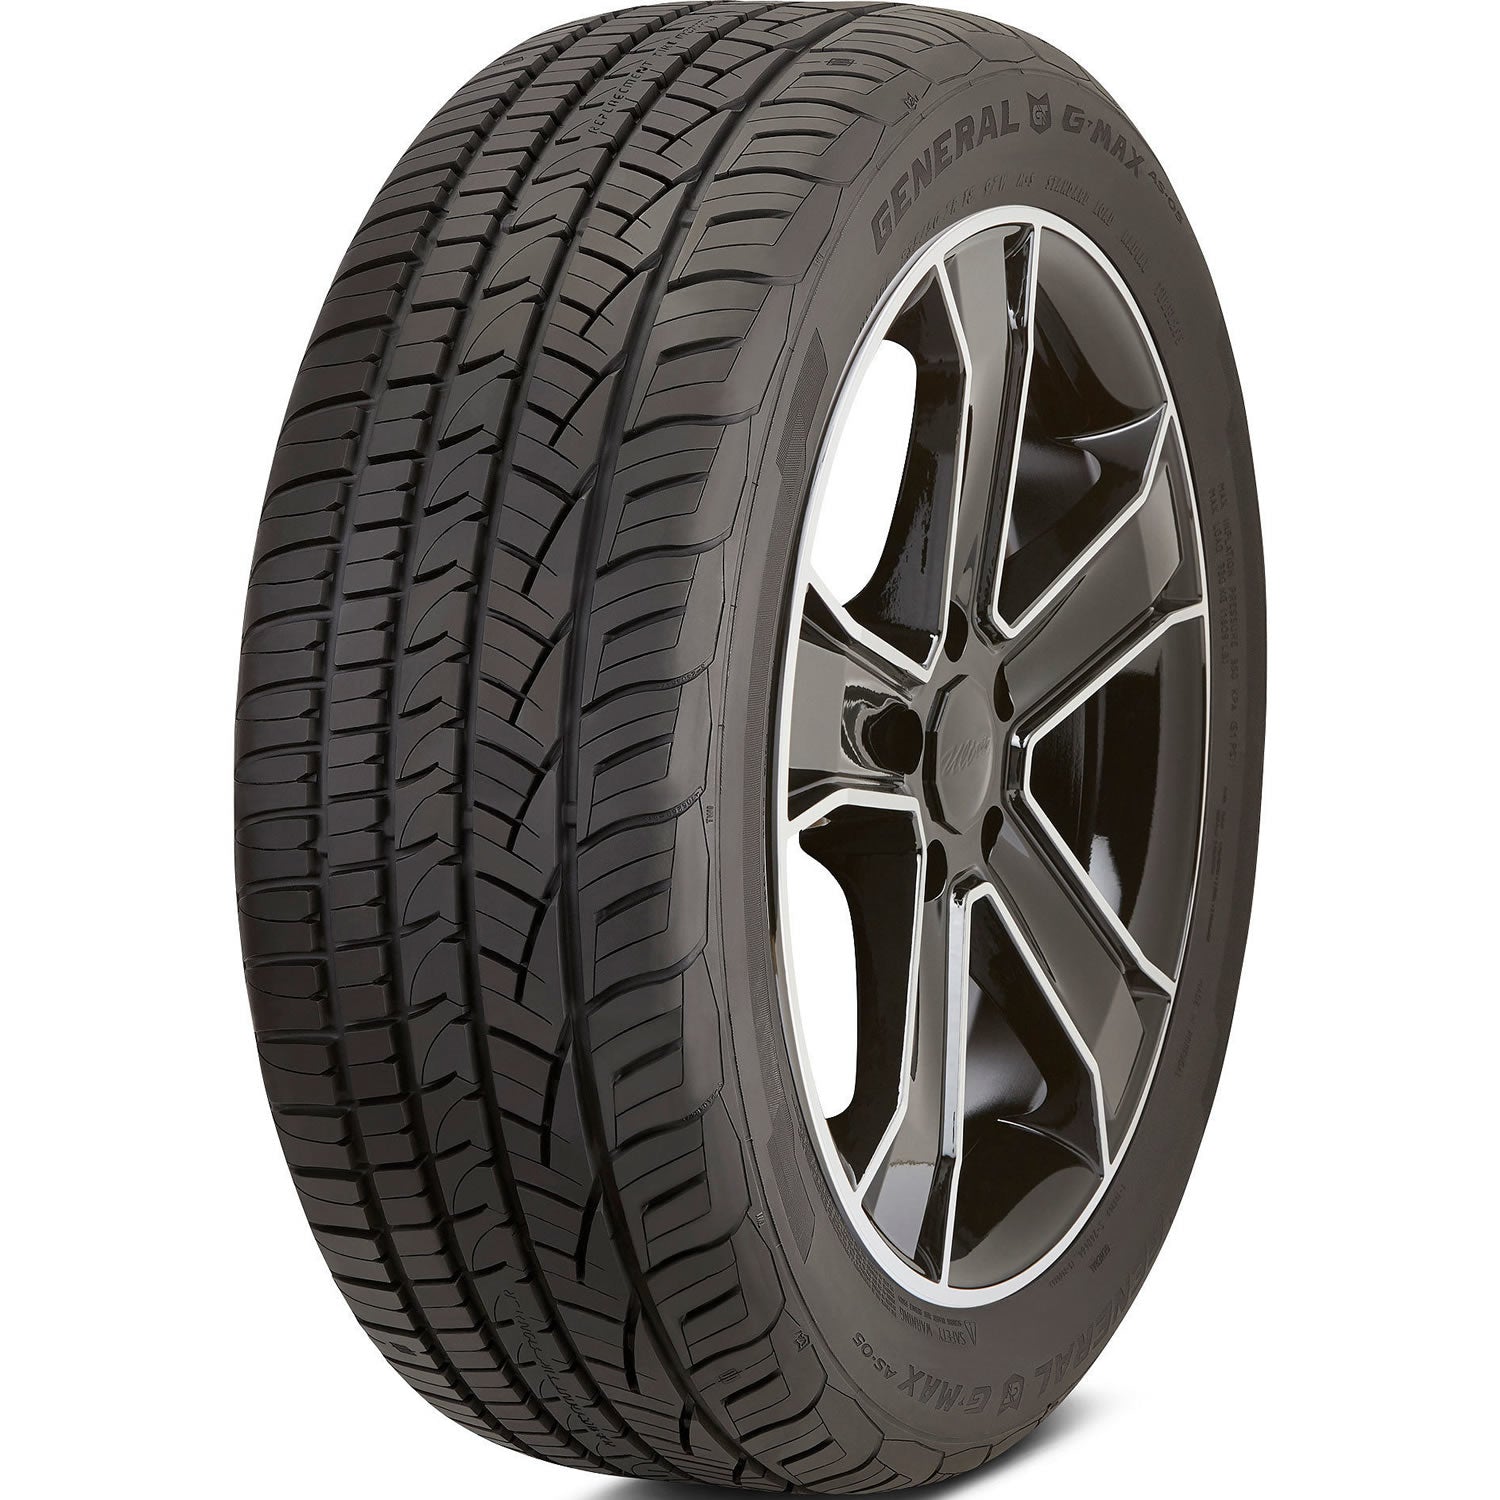 GENERAL G-MAX AS-05 215/55ZR16 (25.3X8.5R 16) Tires